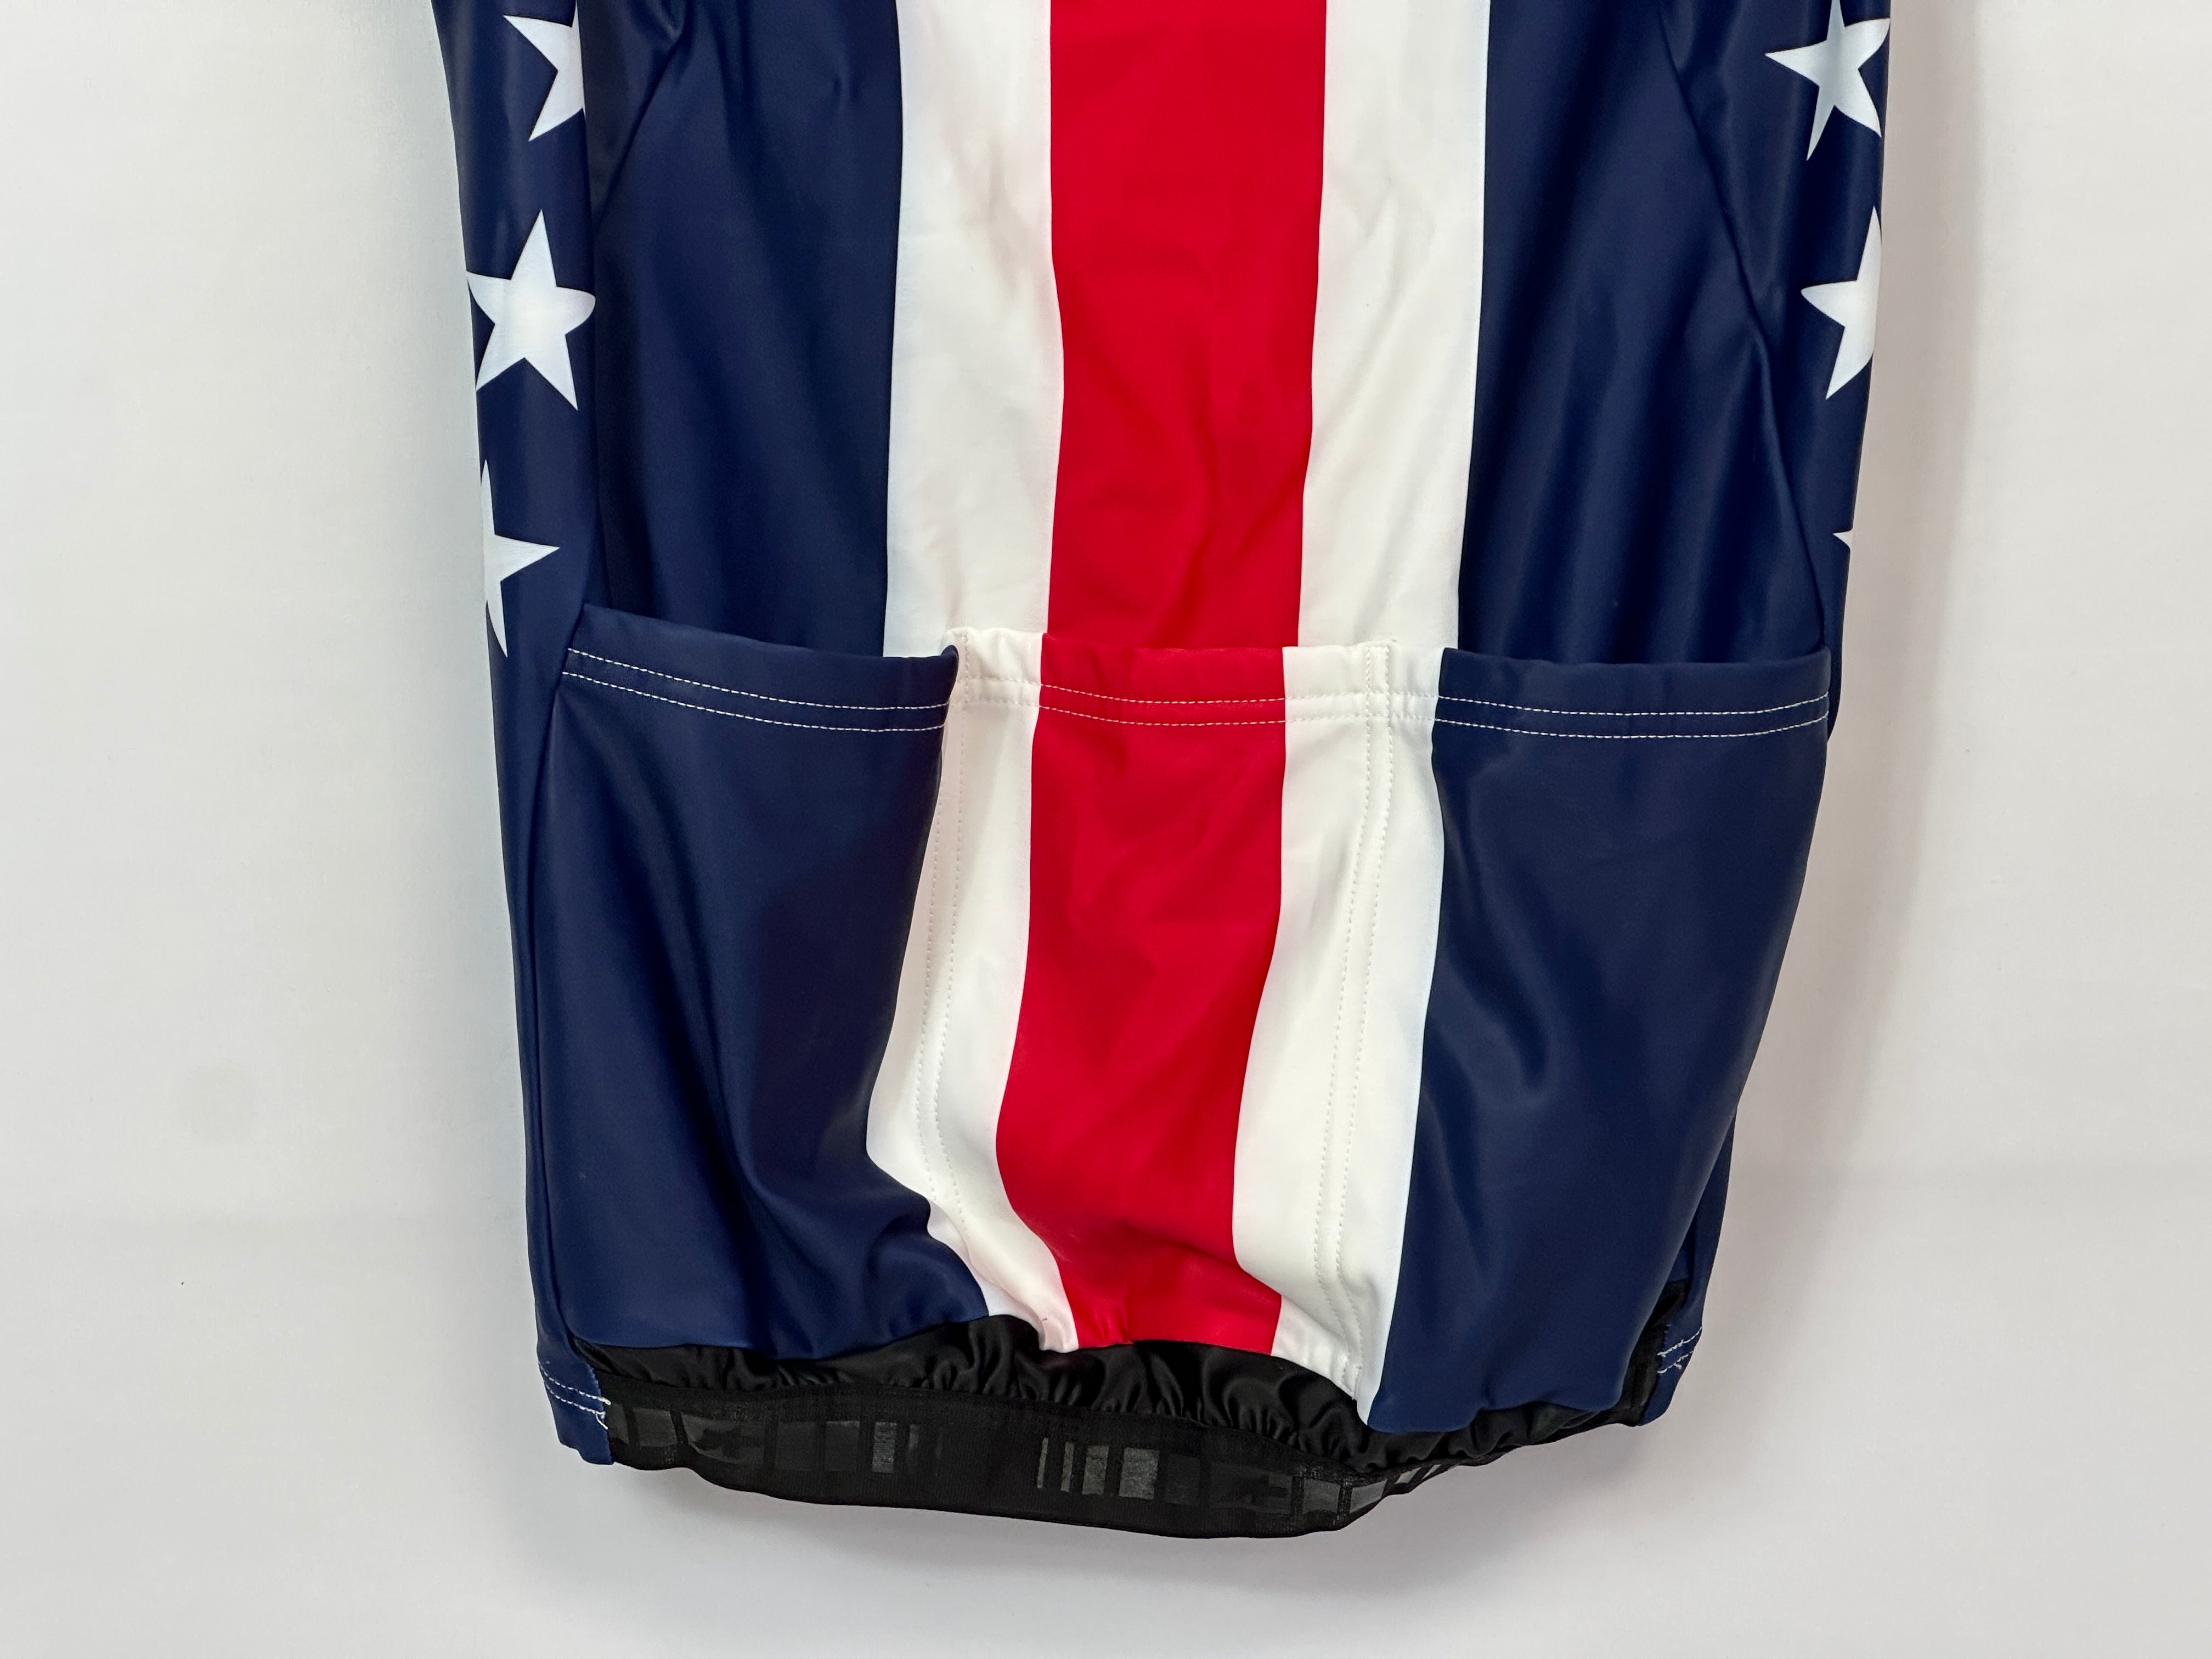 USA National Cycling Team - Thermal Vest by Assos